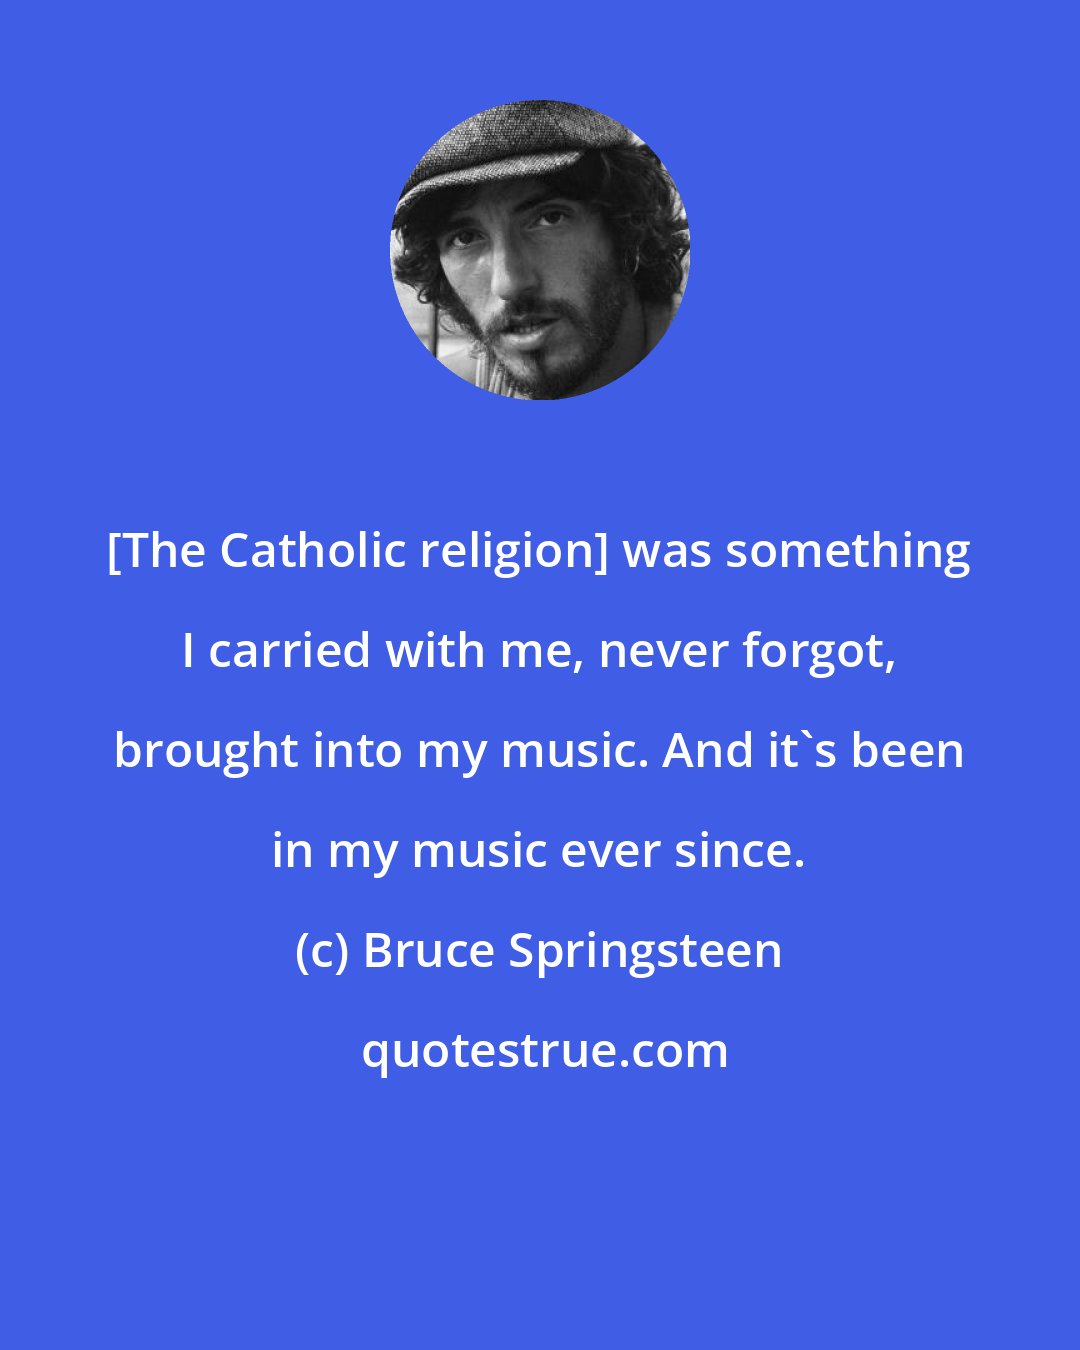 Bruce Springsteen: [The Catholic religion] was something I carried with me, never forgot, brought into my music. And it's been in my music ever since.